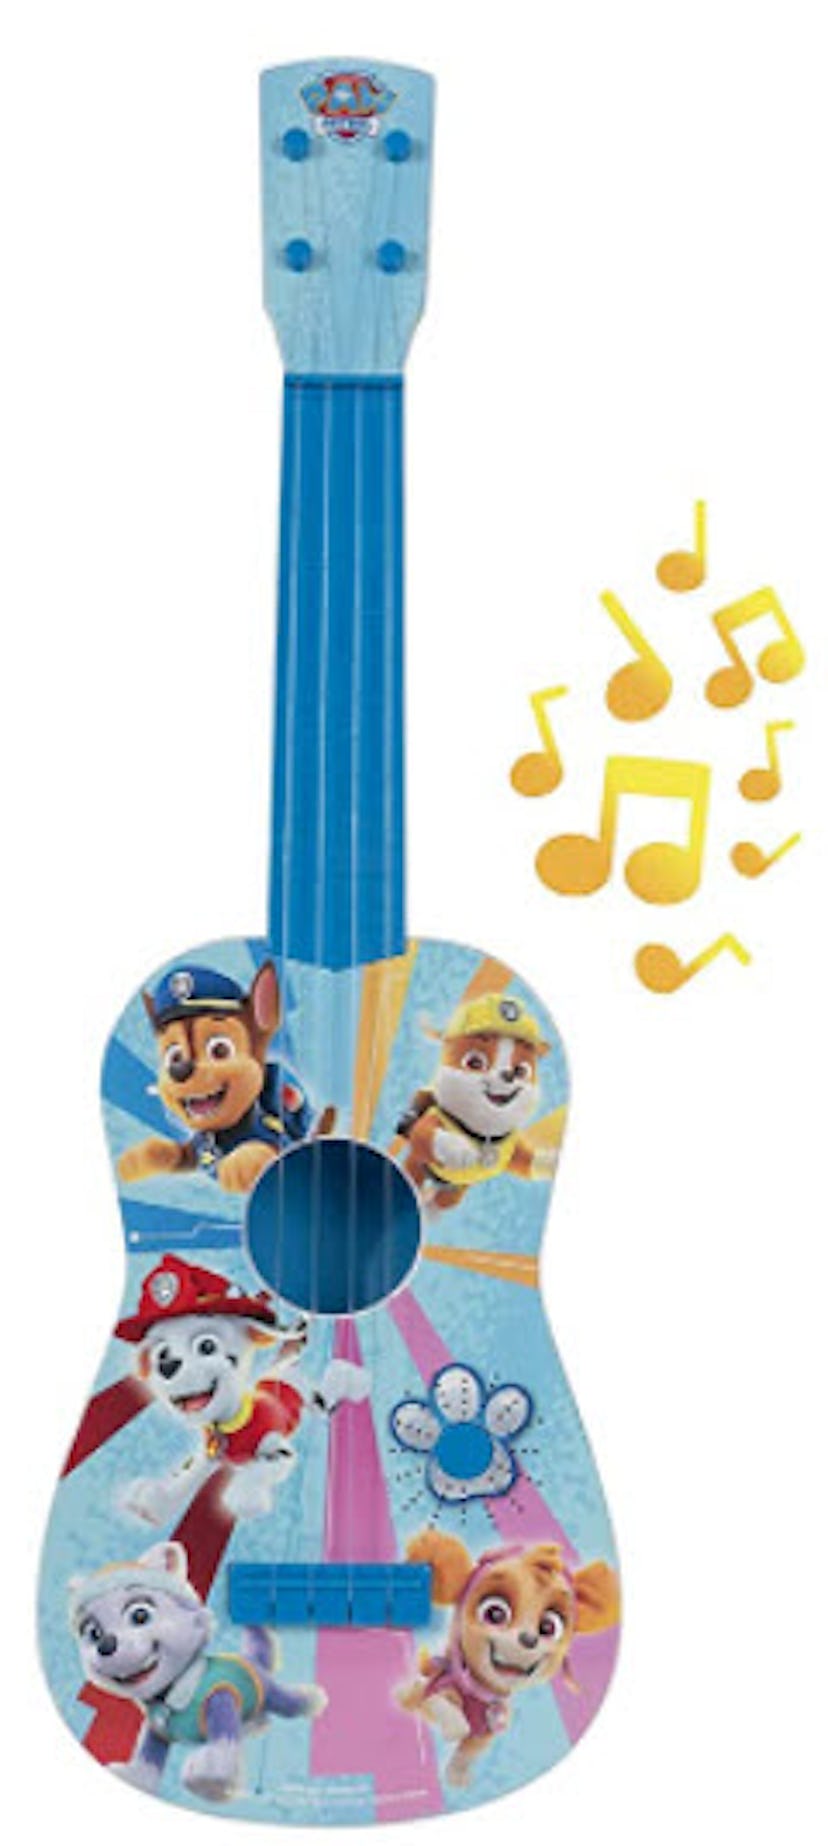 First Act Paw Patrol Musical Guitar